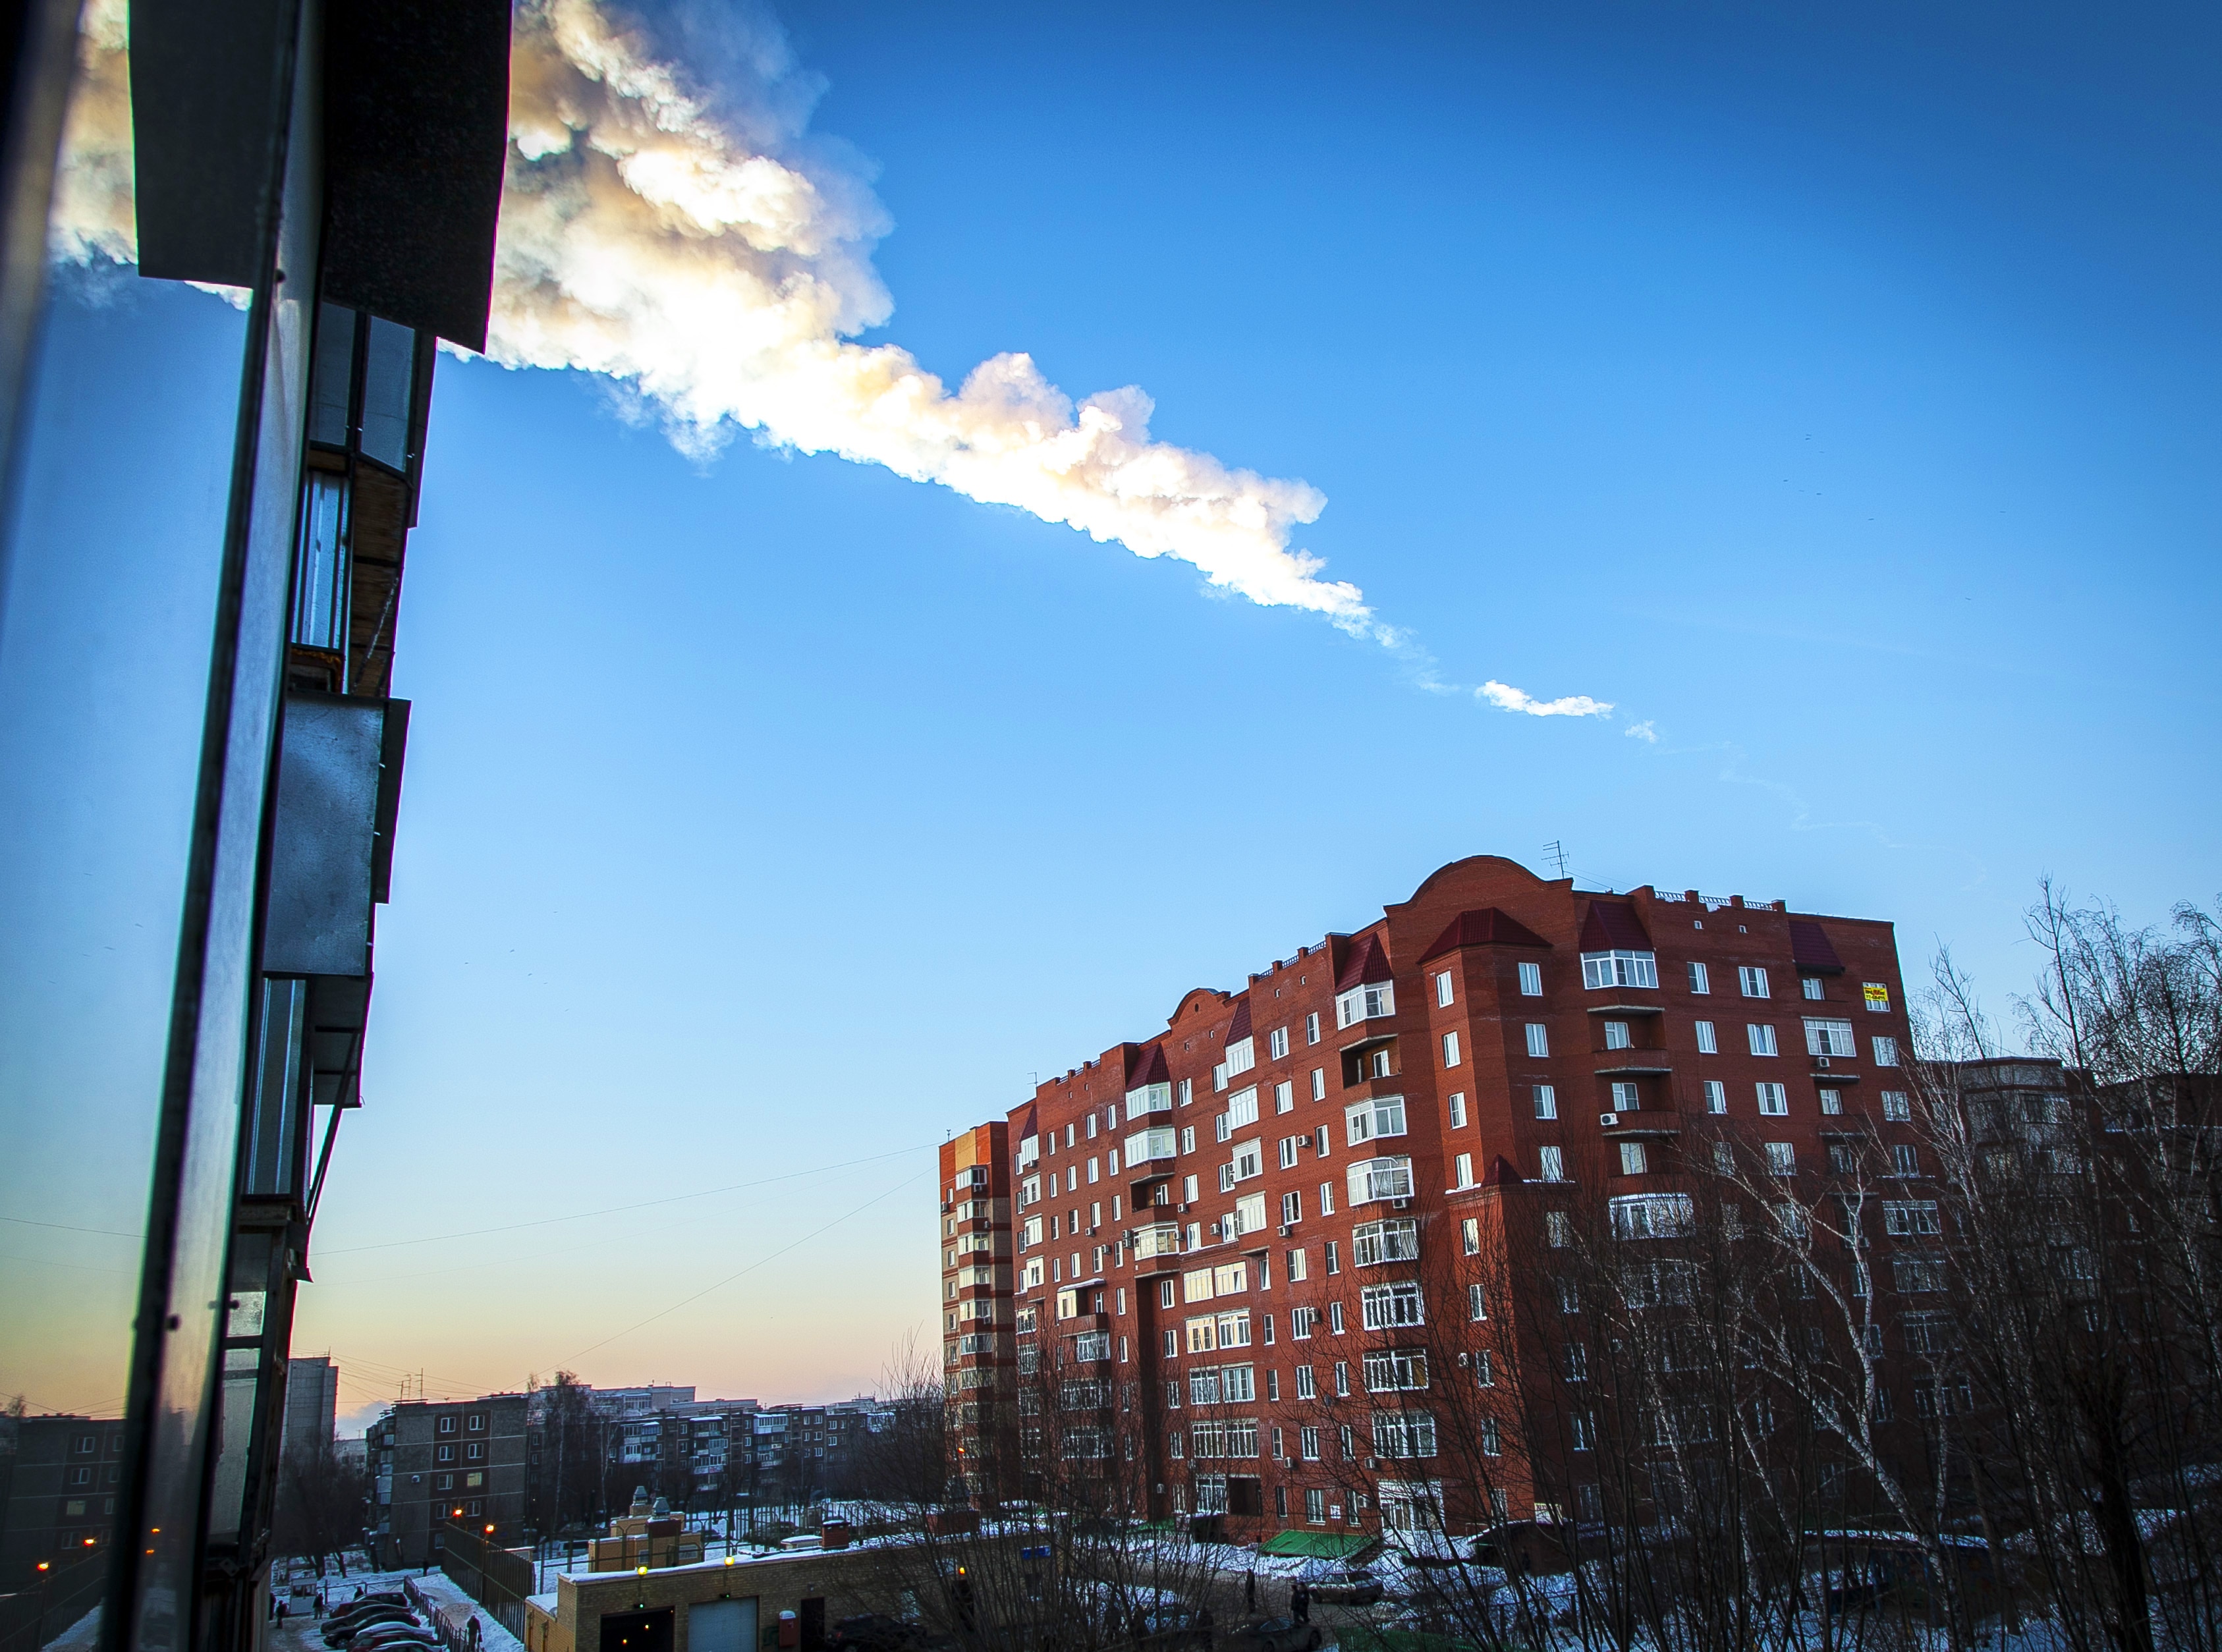 161729171-meteorite-trail-is-seen-above-a-residential-apartment.jpg